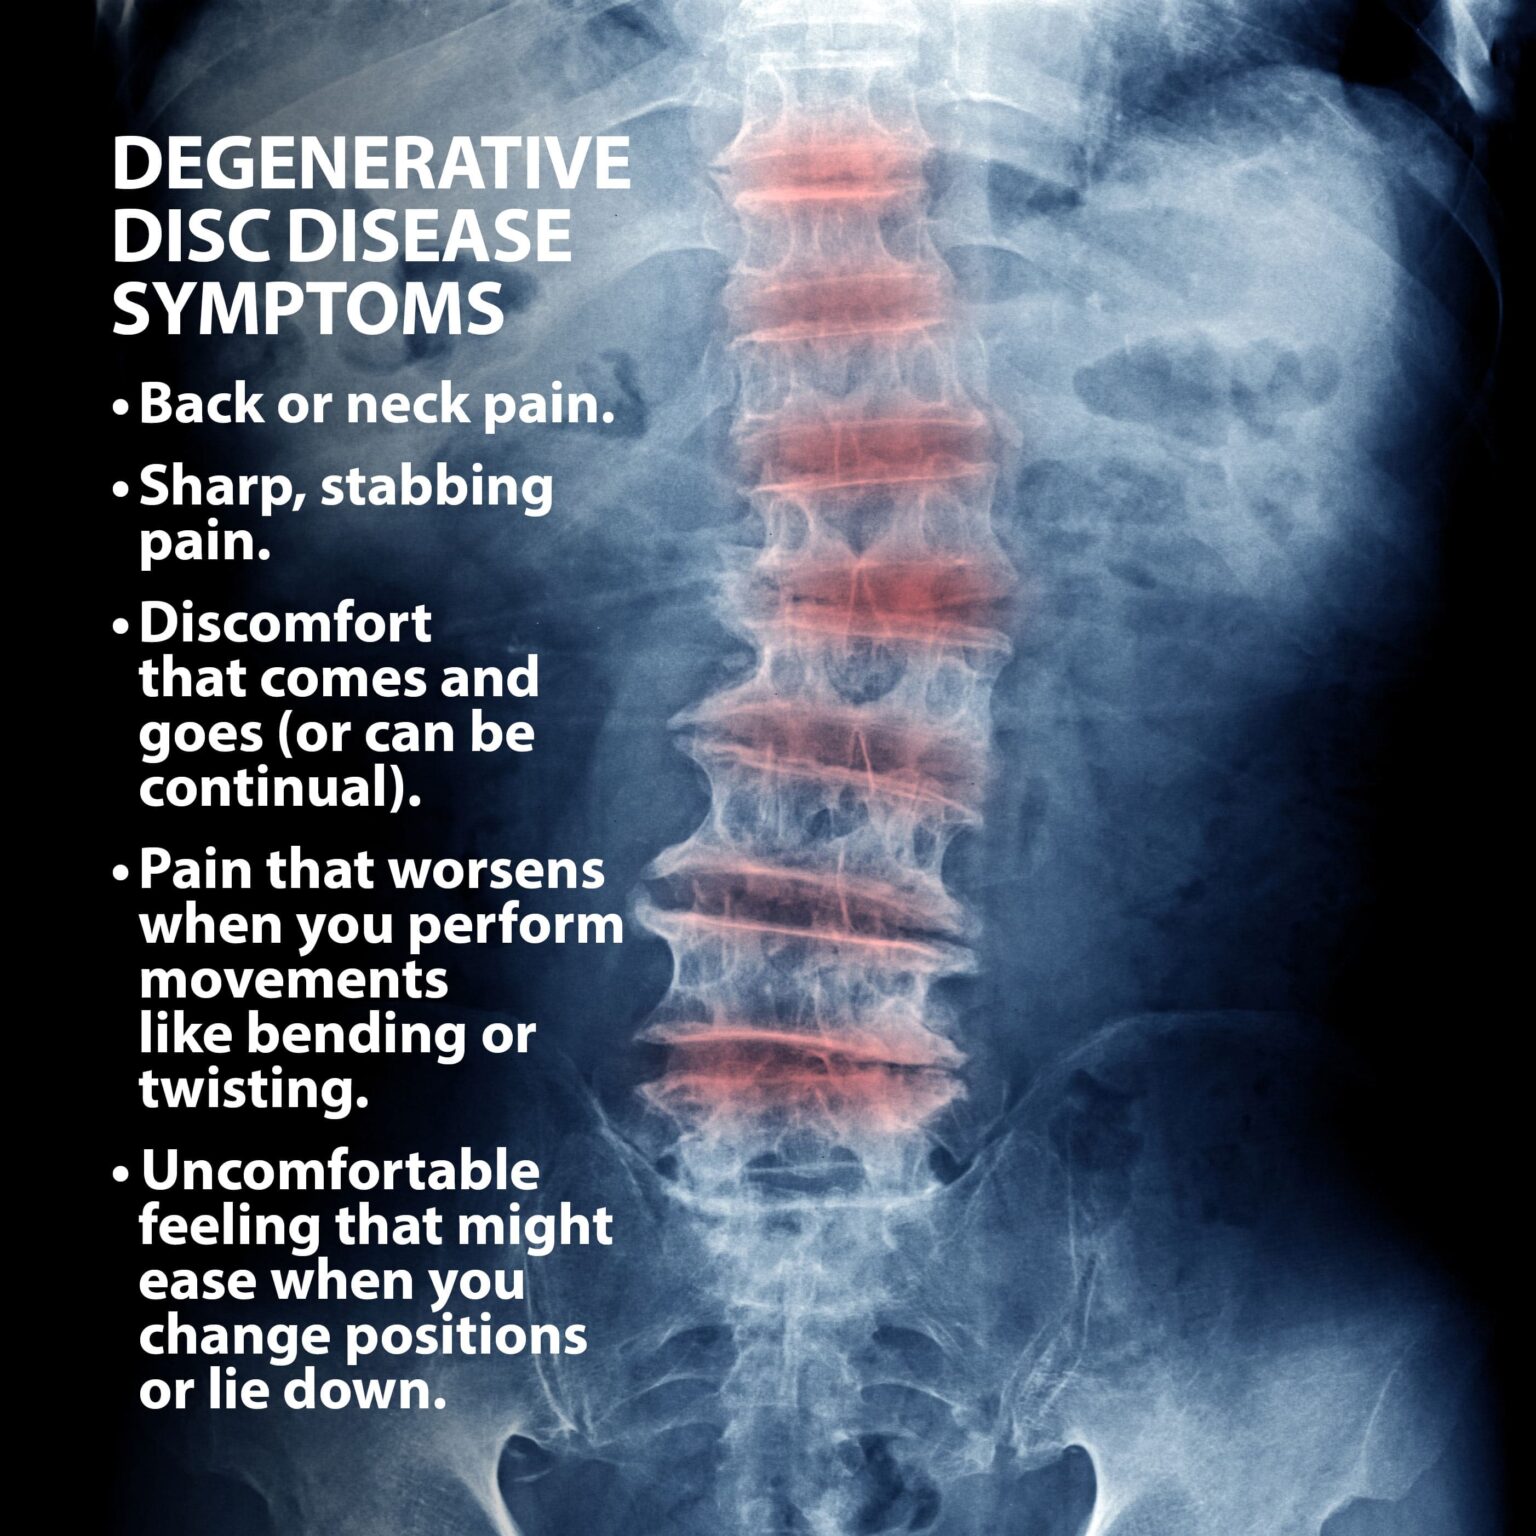 Degenerative Disc Disease Causes Symptoms Pictures And Treatment | My ...